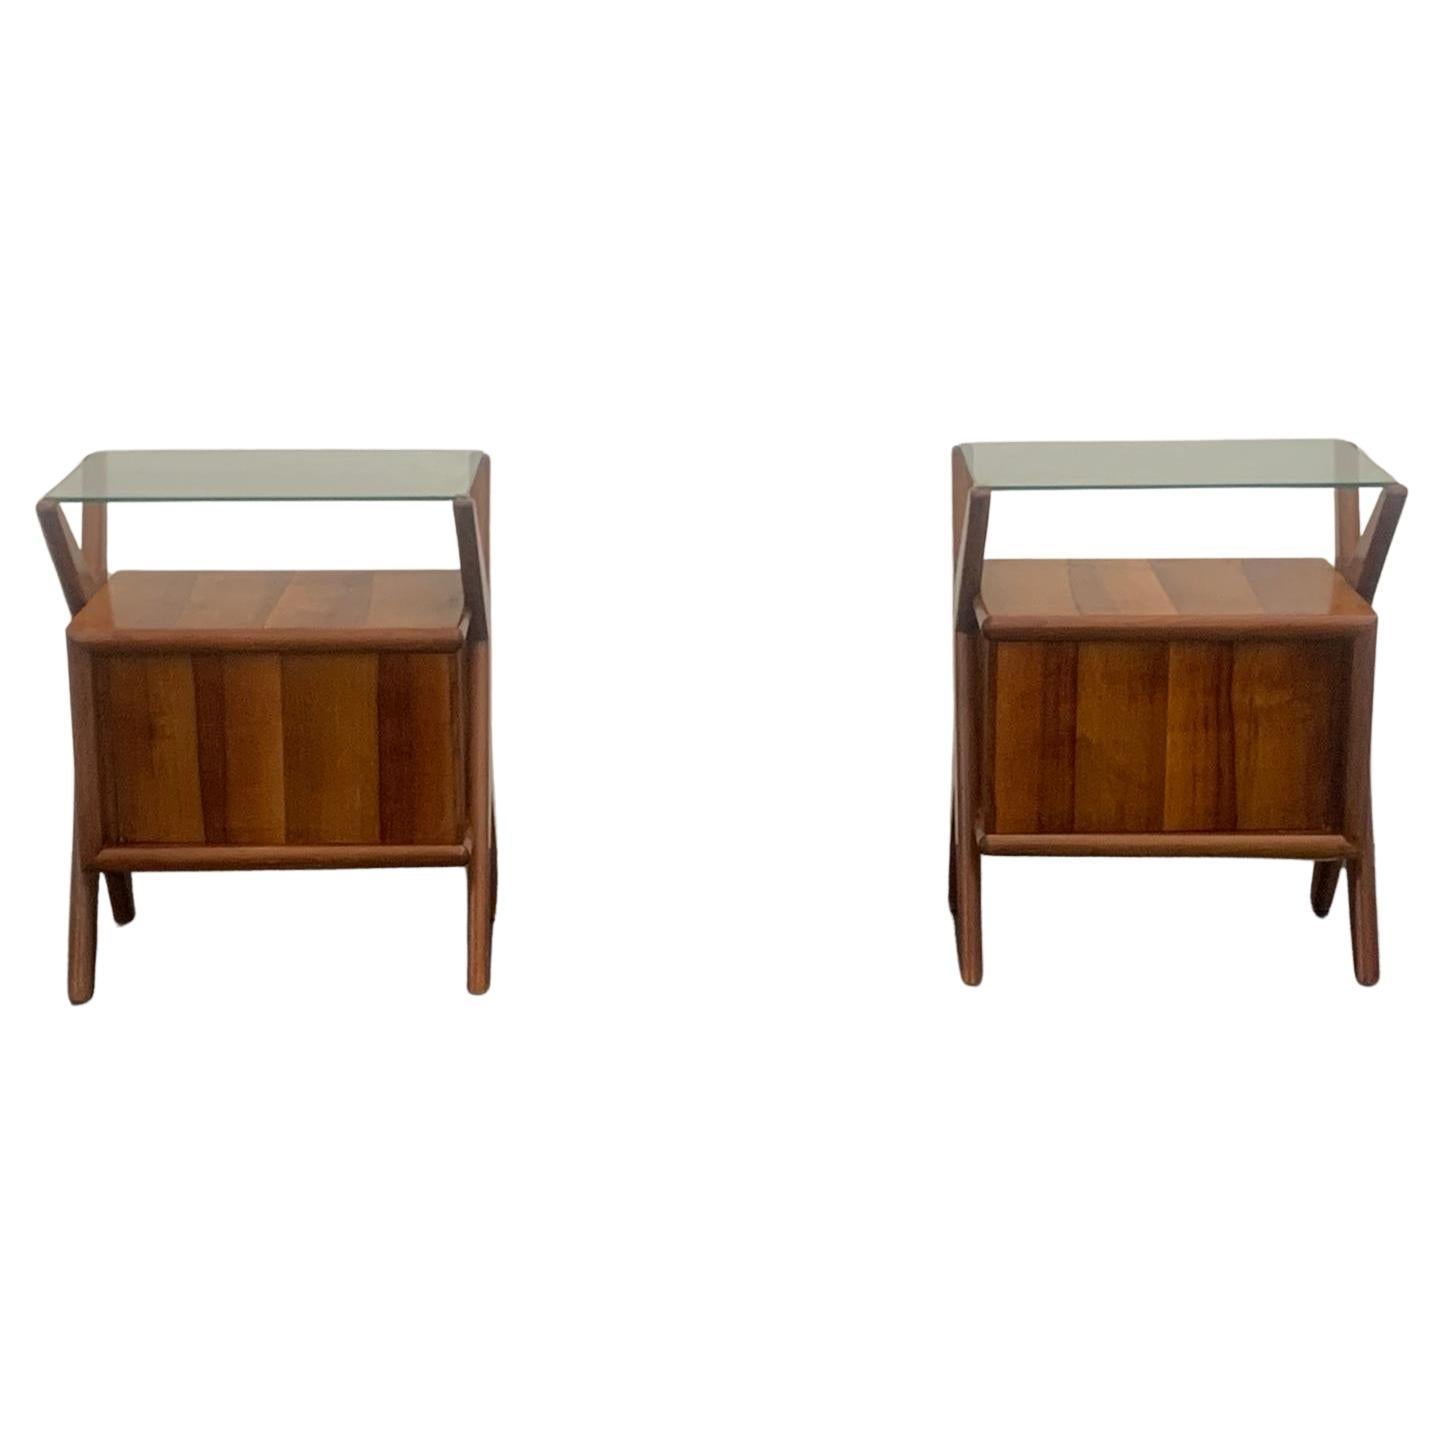 Bedside Tables in Rosewood with Generous Glass Topб Set of 2 For Sale